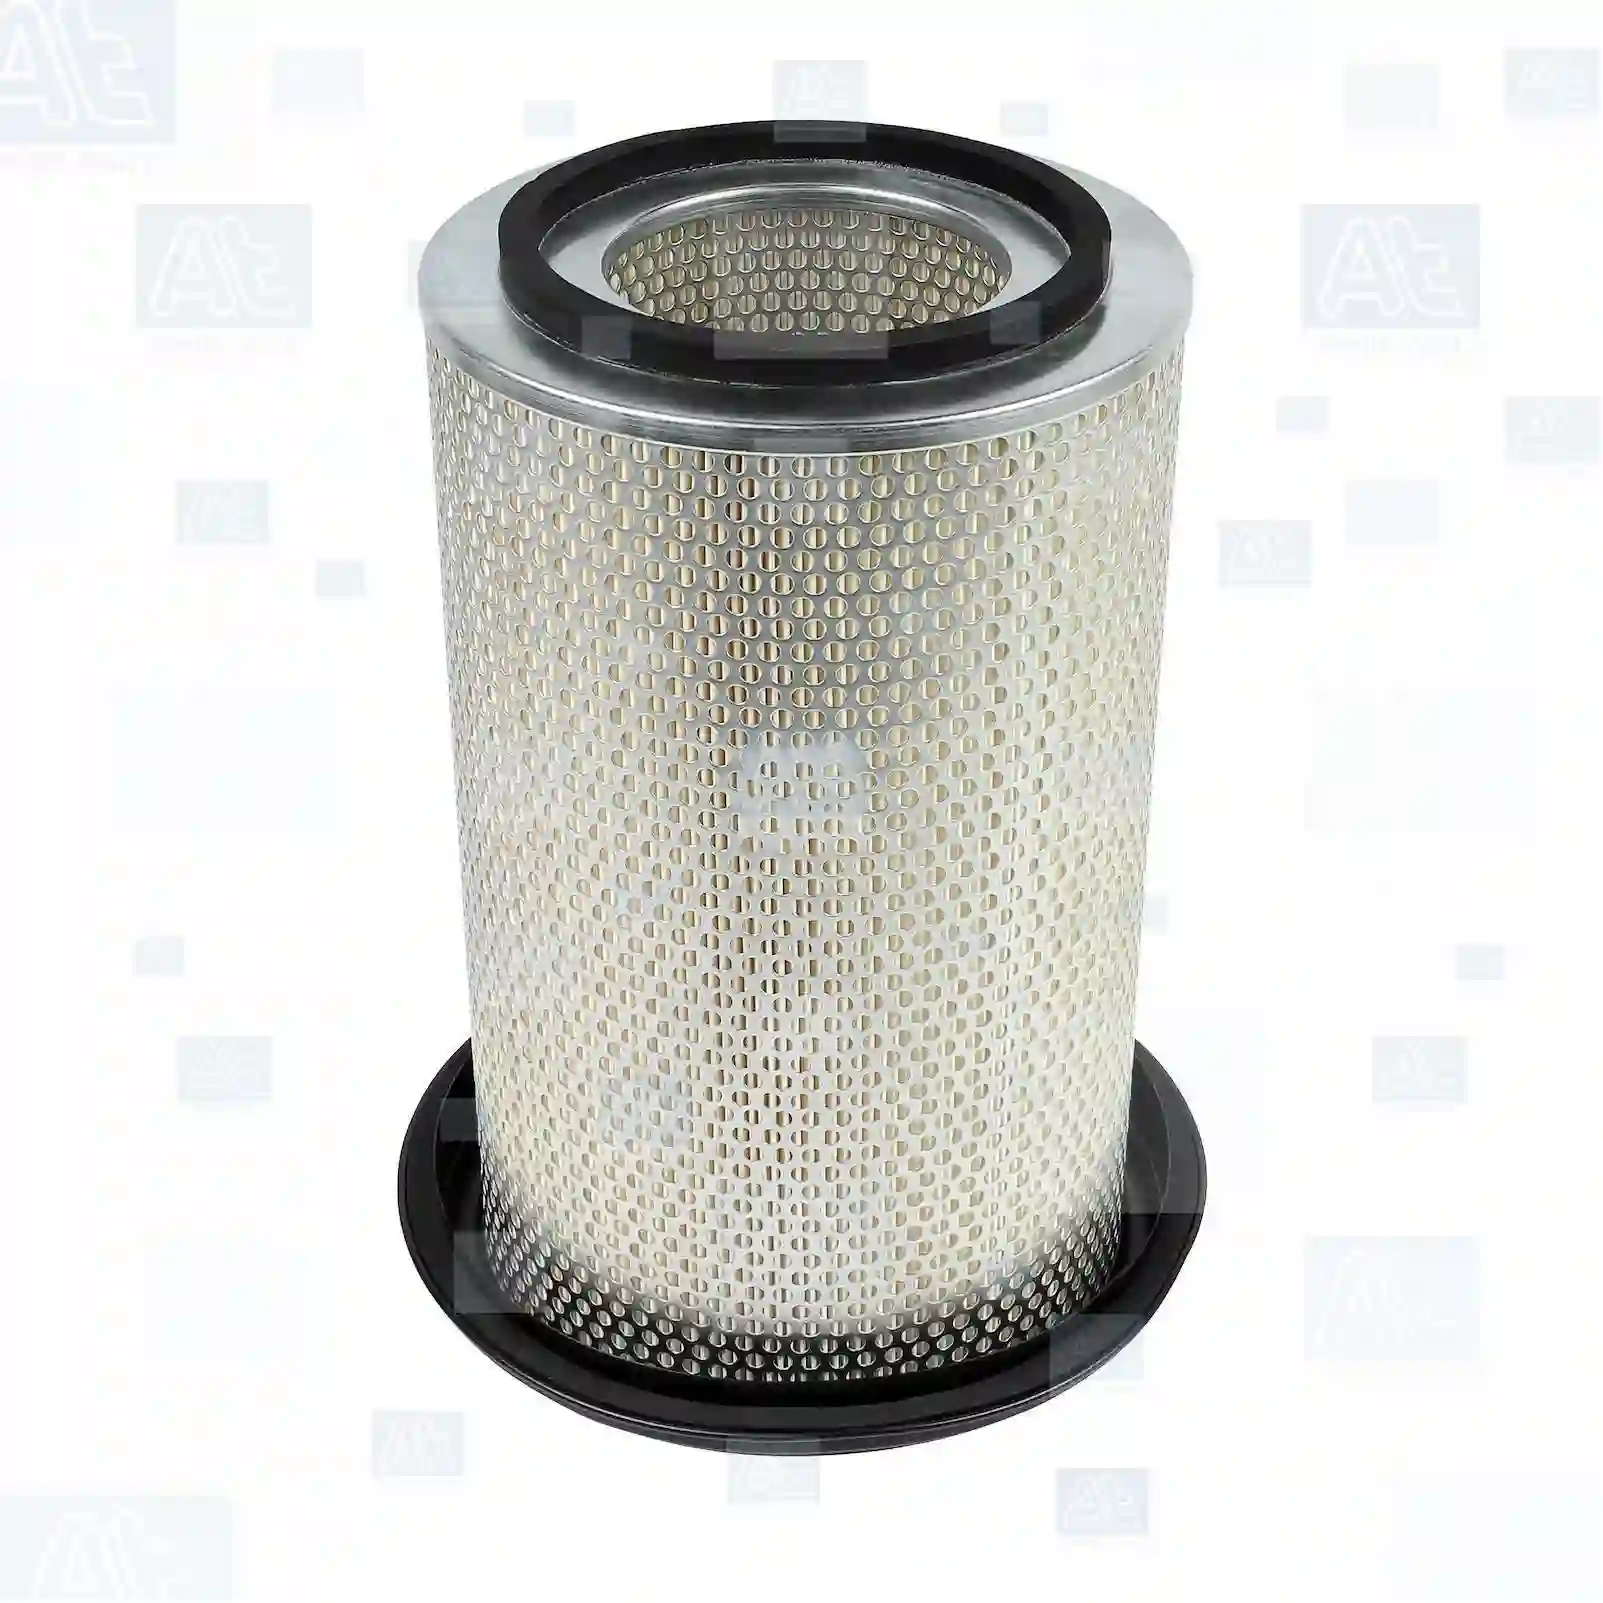 Air filter, at no 77706918, oem no: 10941004, ABU8527, 02164590, 02351325, 02352117, 12153218, 605412970028, 1477102, F280200090020, 02164588, 02164590, 02351325, 02352117, Y03728008, 5011324, 5011555, 93152481, 9974140, 195946205, 02164590, 2164590, AZ23440, AZ23642, HDAM2300, 02164590, 02351325, 02352117, 04544059104, 08183016074, 81083016074, 81083106074, 2872977, 2872977M1, 0010901004, 0010941004, 605412970011, 605412970028, 905412970011, 45399053, 4033128140, 6005019663, R838, 269733, 8319051000E, 8319051043, 83190510430, 1293400011, 12934000111, 195946205, 500858, ZG00812-0008 At Spare Part | Engine, Accelerator Pedal, Camshaft, Connecting Rod, Crankcase, Crankshaft, Cylinder Head, Engine Suspension Mountings, Exhaust Manifold, Exhaust Gas Recirculation, Filter Kits, Flywheel Housing, General Overhaul Kits, Engine, Intake Manifold, Oil Cleaner, Oil Cooler, Oil Filter, Oil Pump, Oil Sump, Piston & Liner, Sensor & Switch, Timing Case, Turbocharger, Cooling System, Belt Tensioner, Coolant Filter, Coolant Pipe, Corrosion Prevention Agent, Drive, Expansion Tank, Fan, Intercooler, Monitors & Gauges, Radiator, Thermostat, V-Belt / Timing belt, Water Pump, Fuel System, Electronical Injector Unit, Feed Pump, Fuel Filter, cpl., Fuel Gauge Sender,  Fuel Line, Fuel Pump, Fuel Tank, Injection Line Kit, Injection Pump, Exhaust System, Clutch & Pedal, Gearbox, Propeller Shaft, Axles, Brake System, Hubs & Wheels, Suspension, Leaf Spring, Universal Parts / Accessories, Steering, Electrical System, Cabin Air filter, at no 77706918, oem no: 10941004, ABU8527, 02164590, 02351325, 02352117, 12153218, 605412970028, 1477102, F280200090020, 02164588, 02164590, 02351325, 02352117, Y03728008, 5011324, 5011555, 93152481, 9974140, 195946205, 02164590, 2164590, AZ23440, AZ23642, HDAM2300, 02164590, 02351325, 02352117, 04544059104, 08183016074, 81083016074, 81083106074, 2872977, 2872977M1, 0010901004, 0010941004, 605412970011, 605412970028, 905412970011, 45399053, 4033128140, 6005019663, R838, 269733, 8319051000E, 8319051043, 83190510430, 1293400011, 12934000111, 195946205, 500858, ZG00812-0008 At Spare Part | Engine, Accelerator Pedal, Camshaft, Connecting Rod, Crankcase, Crankshaft, Cylinder Head, Engine Suspension Mountings, Exhaust Manifold, Exhaust Gas Recirculation, Filter Kits, Flywheel Housing, General Overhaul Kits, Engine, Intake Manifold, Oil Cleaner, Oil Cooler, Oil Filter, Oil Pump, Oil Sump, Piston & Liner, Sensor & Switch, Timing Case, Turbocharger, Cooling System, Belt Tensioner, Coolant Filter, Coolant Pipe, Corrosion Prevention Agent, Drive, Expansion Tank, Fan, Intercooler, Monitors & Gauges, Radiator, Thermostat, V-Belt / Timing belt, Water Pump, Fuel System, Electronical Injector Unit, Feed Pump, Fuel Filter, cpl., Fuel Gauge Sender,  Fuel Line, Fuel Pump, Fuel Tank, Injection Line Kit, Injection Pump, Exhaust System, Clutch & Pedal, Gearbox, Propeller Shaft, Axles, Brake System, Hubs & Wheels, Suspension, Leaf Spring, Universal Parts / Accessories, Steering, Electrical System, Cabin